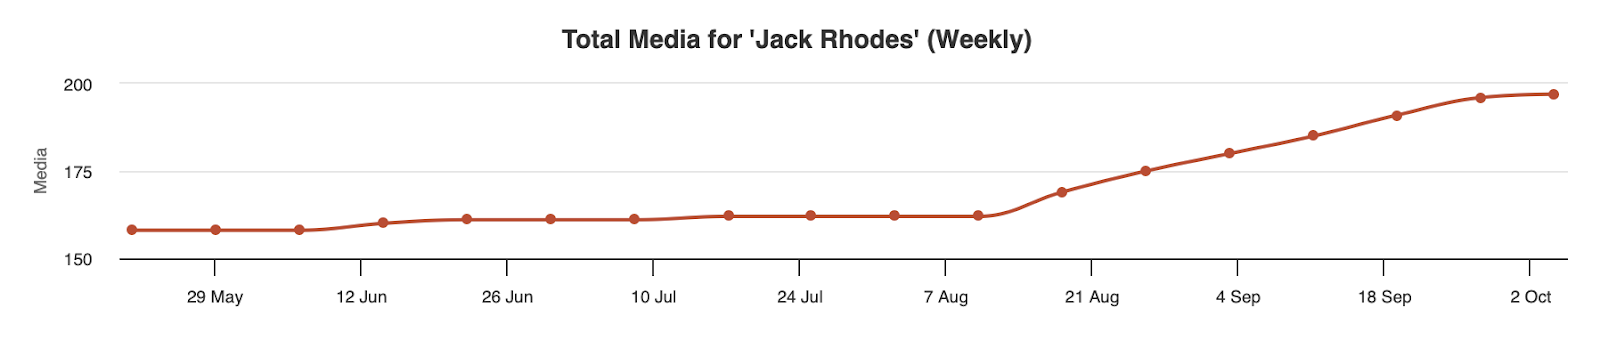 Chart shows Jack Rhodes total media increasing at a higher rate